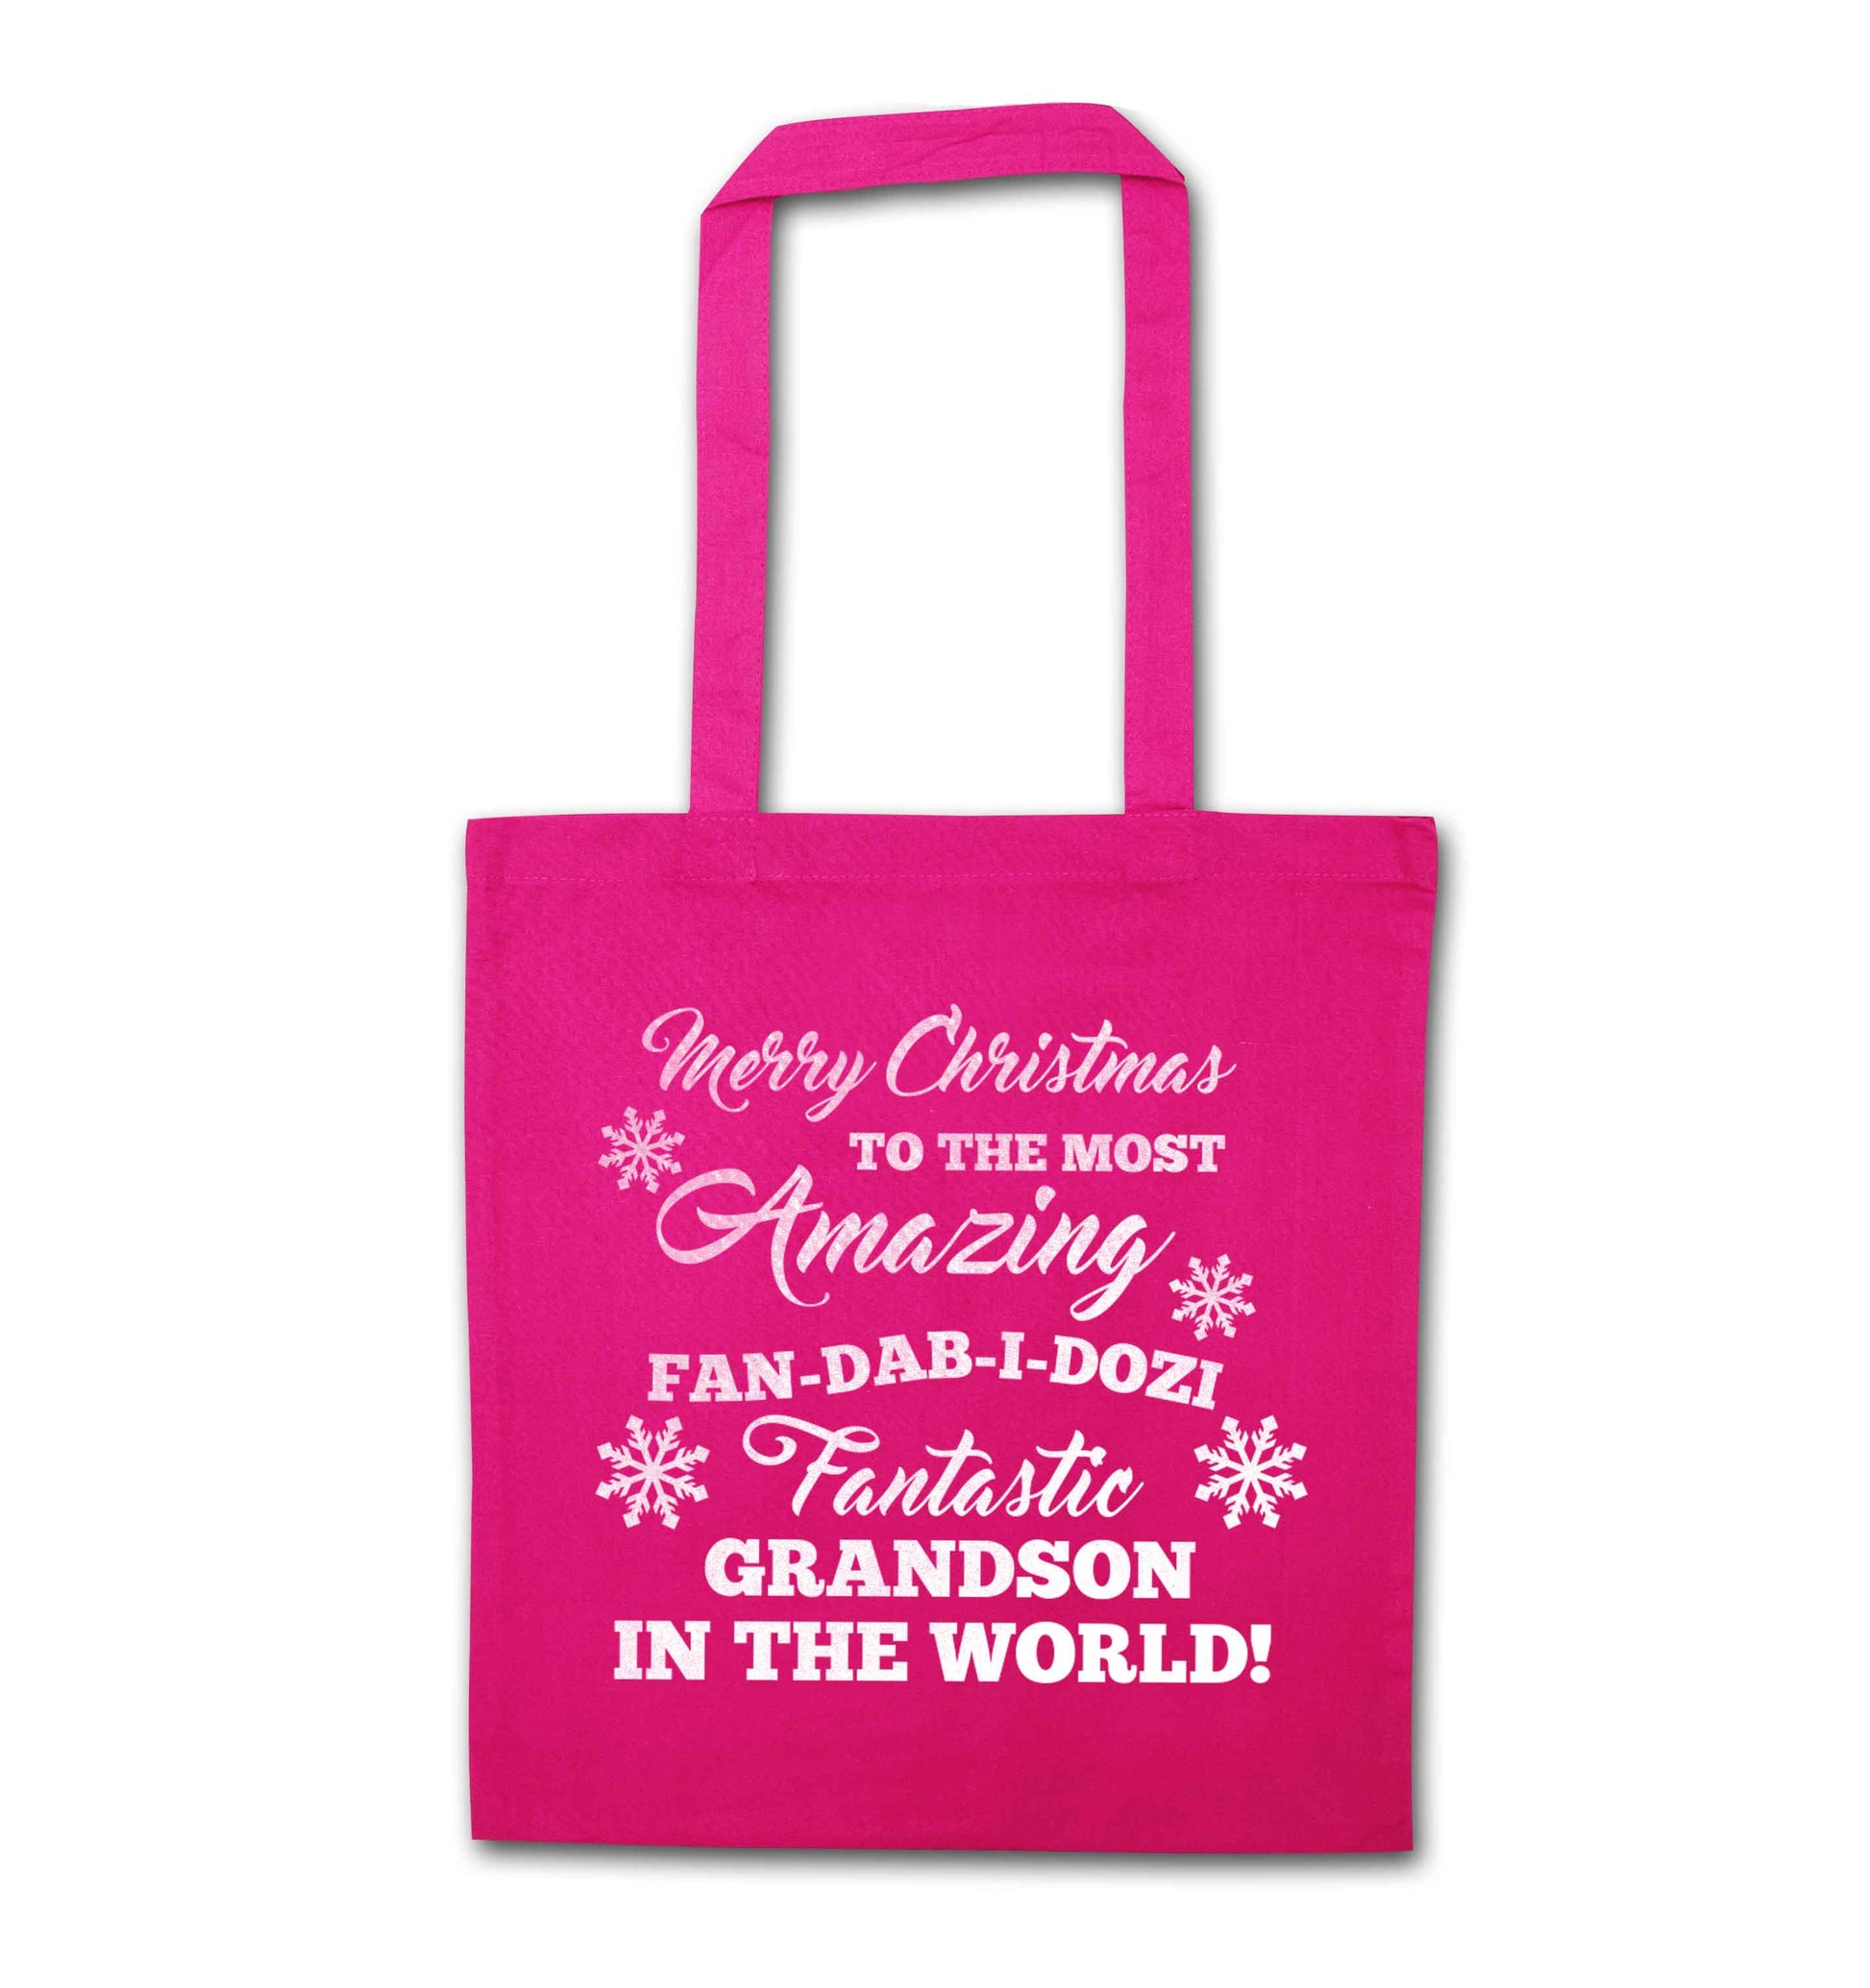 Merry Christmas to the most amazing fan-dab-i-dozi fantasic Grandson in the world pink tote bag